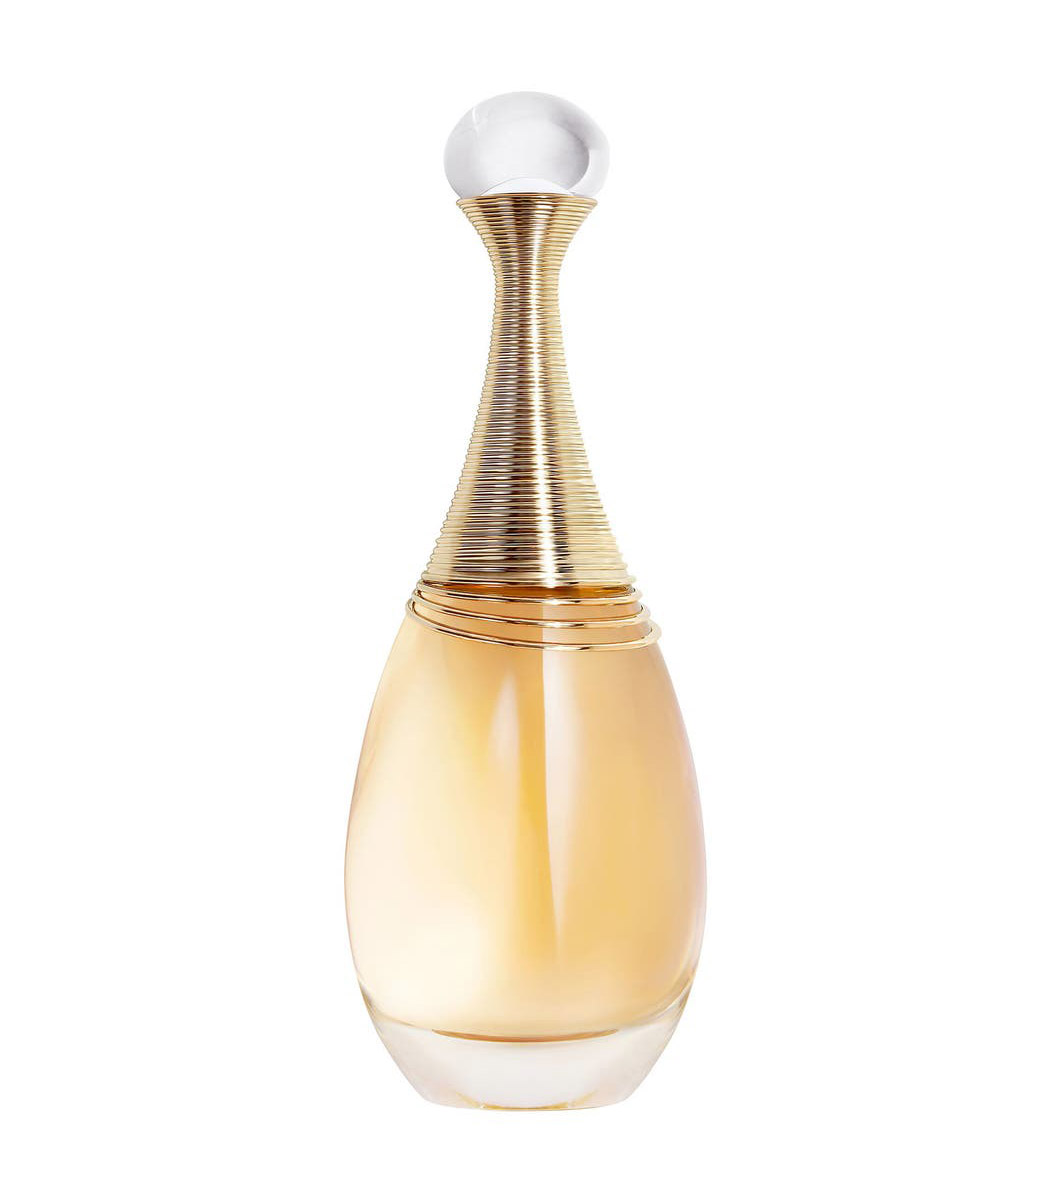 The Top 15 Prettiest Perfume Bottles to Add to Your Collection